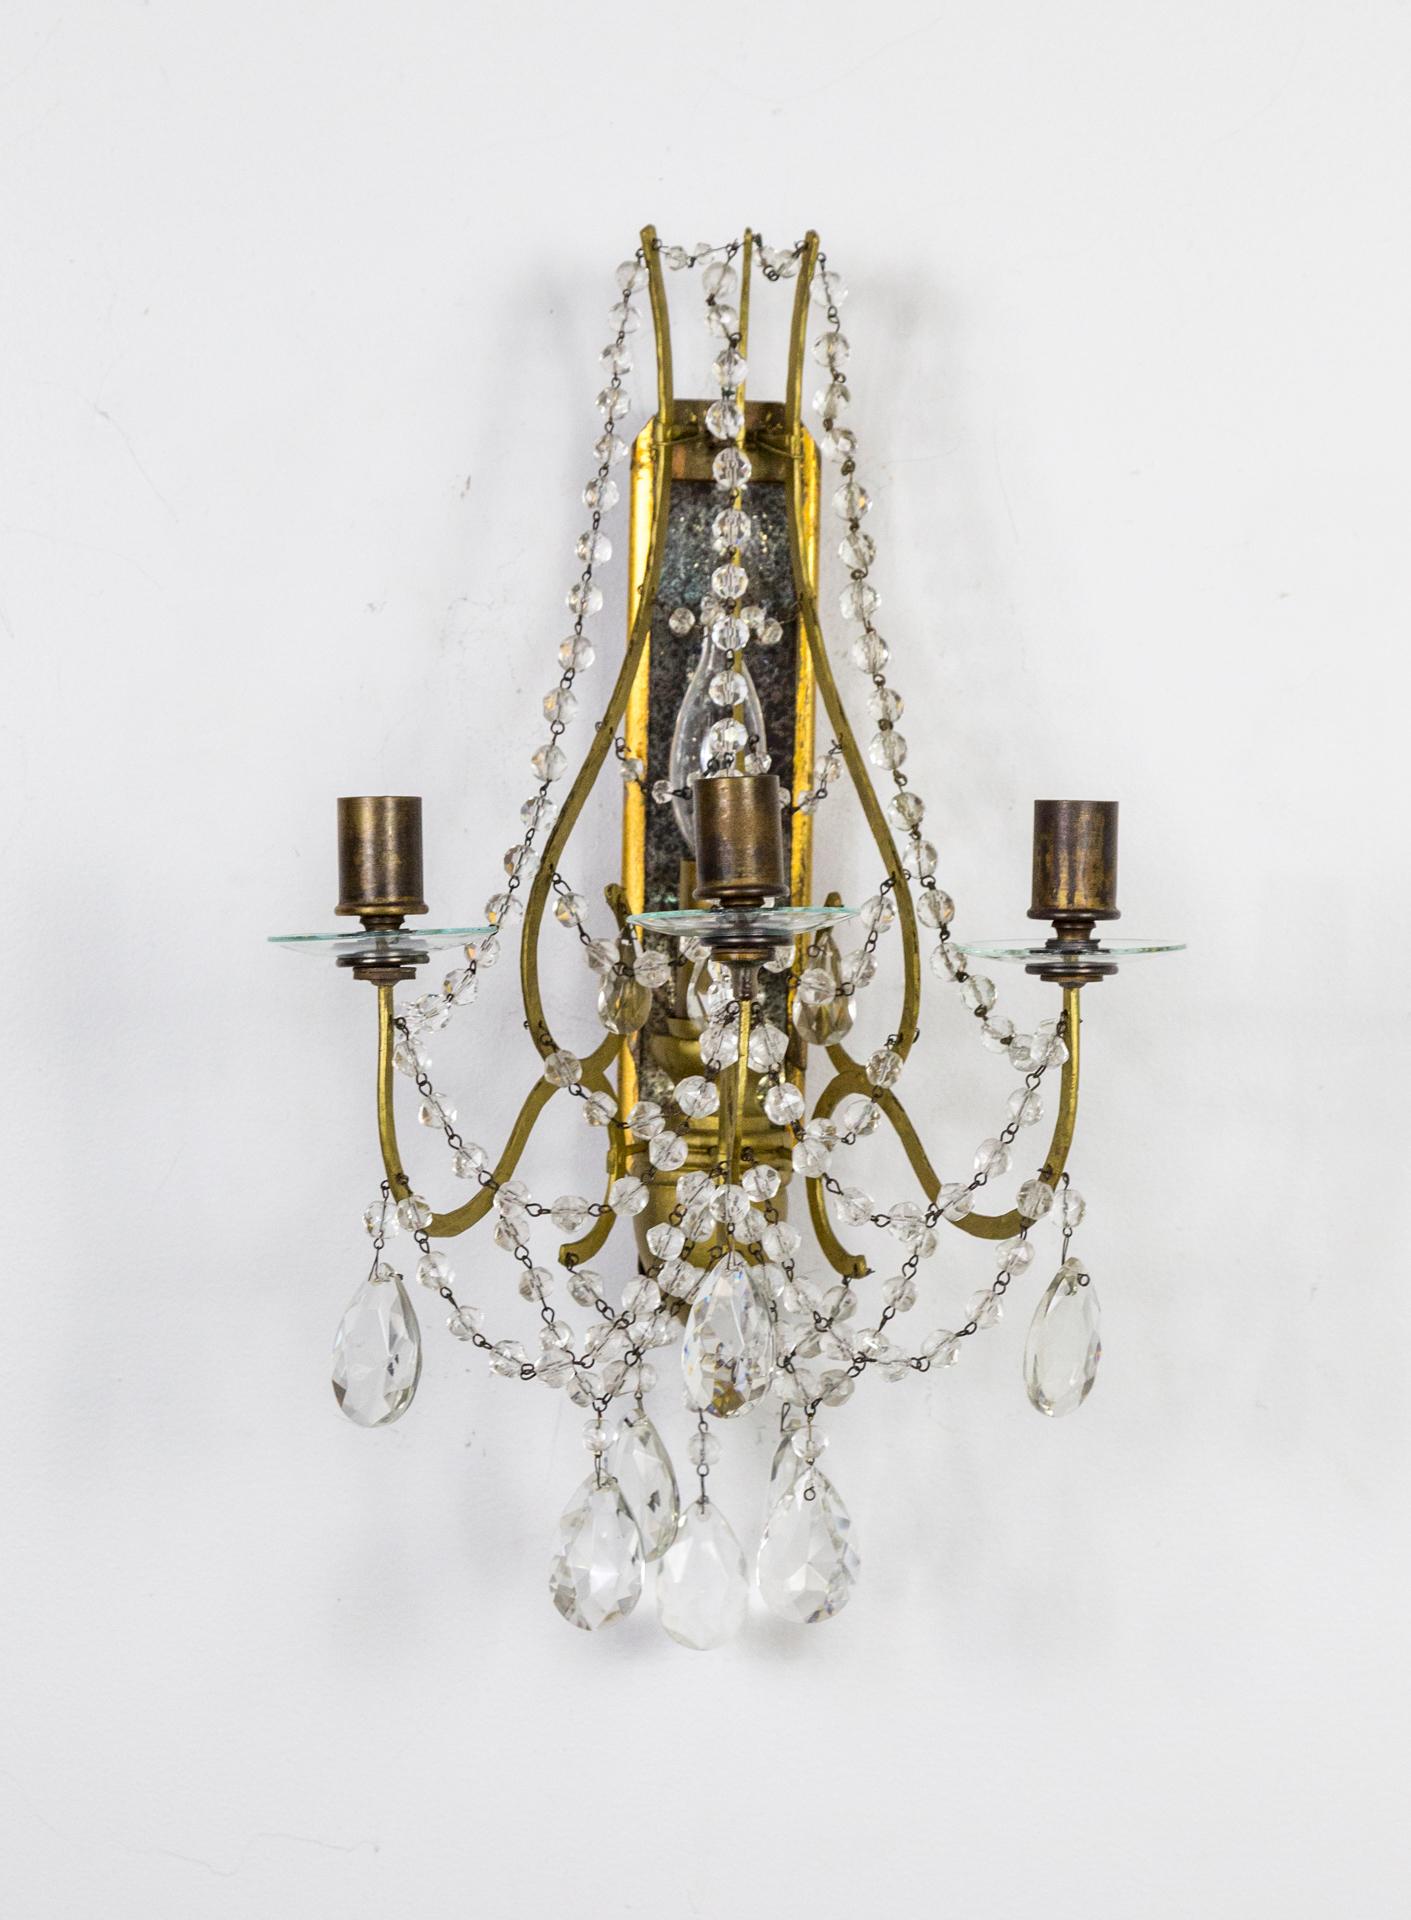 A Belle Epoque pair of highly decorative sconces with original antique mirror on gilded wood back plates with urn details, glass bobeches, and crystal beading. One middle candelabra light (60w max) and 3 candle holders (candles not included).